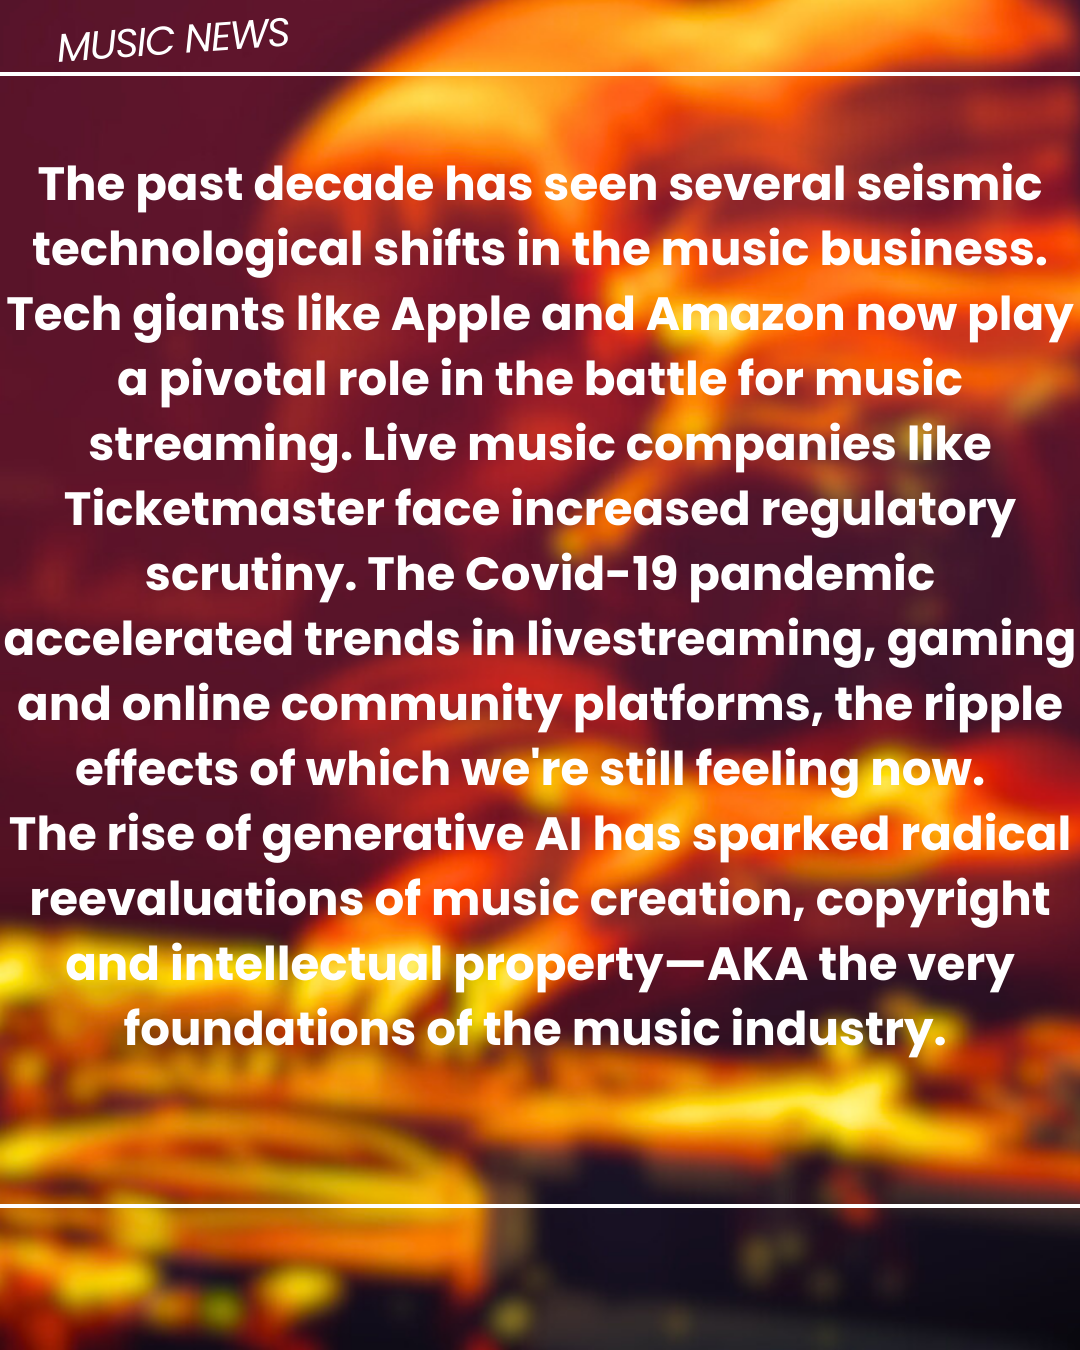 MUSIC NEWS

 
   
    

 

The past decade has seen several seismic
technological shifts in th
Tech giants like Apple an
a pivotal role in the battle for music
streaming. Live music companies like
Ticketmaster face increased regulatory
scrutiny. The Covid-19 pandemic
accelerated trends in livestreaming, gaming
and online community platforms, the ripple
effects of which we! ill feelin
The rise of generative Al ¢] [

reevaluations of music creation, copyright
Te a
foundations ofthe music industrys
EE JAS

»